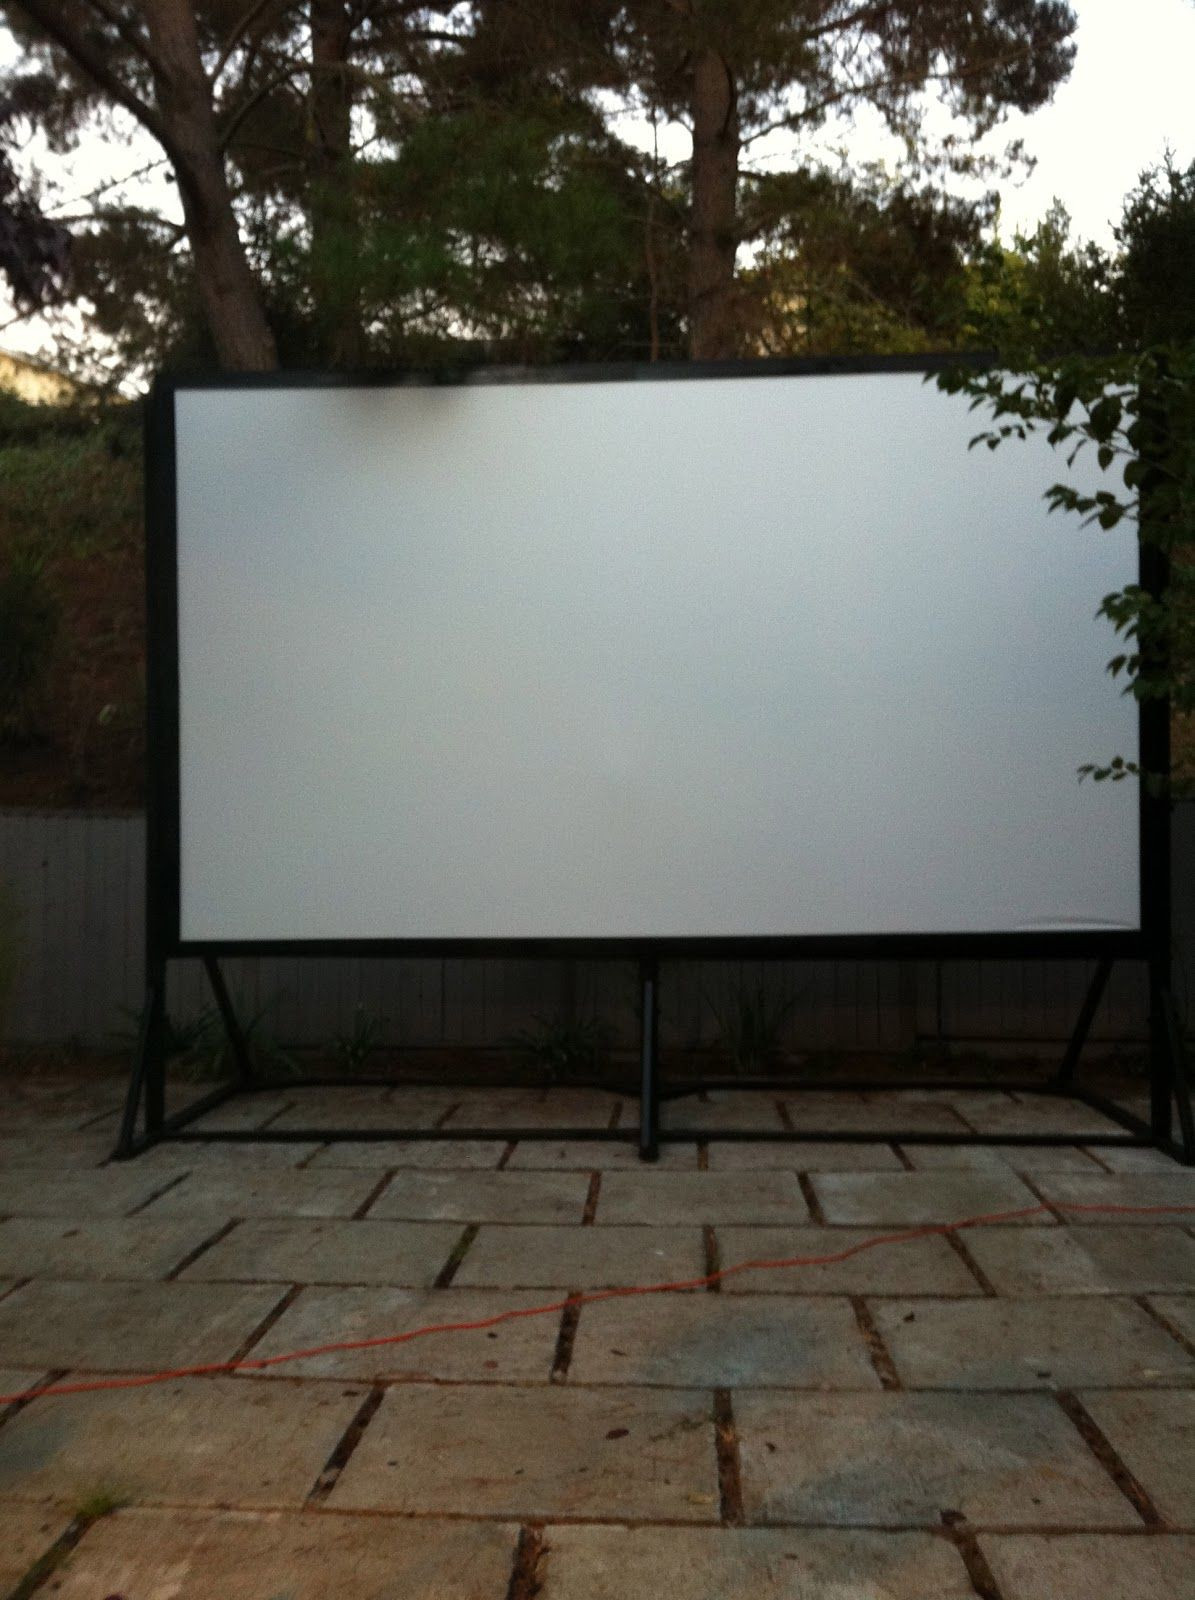 DIY Outdoor Theatre Screen
 9x16 DIY Outdoor movie screen for only $250 Great for